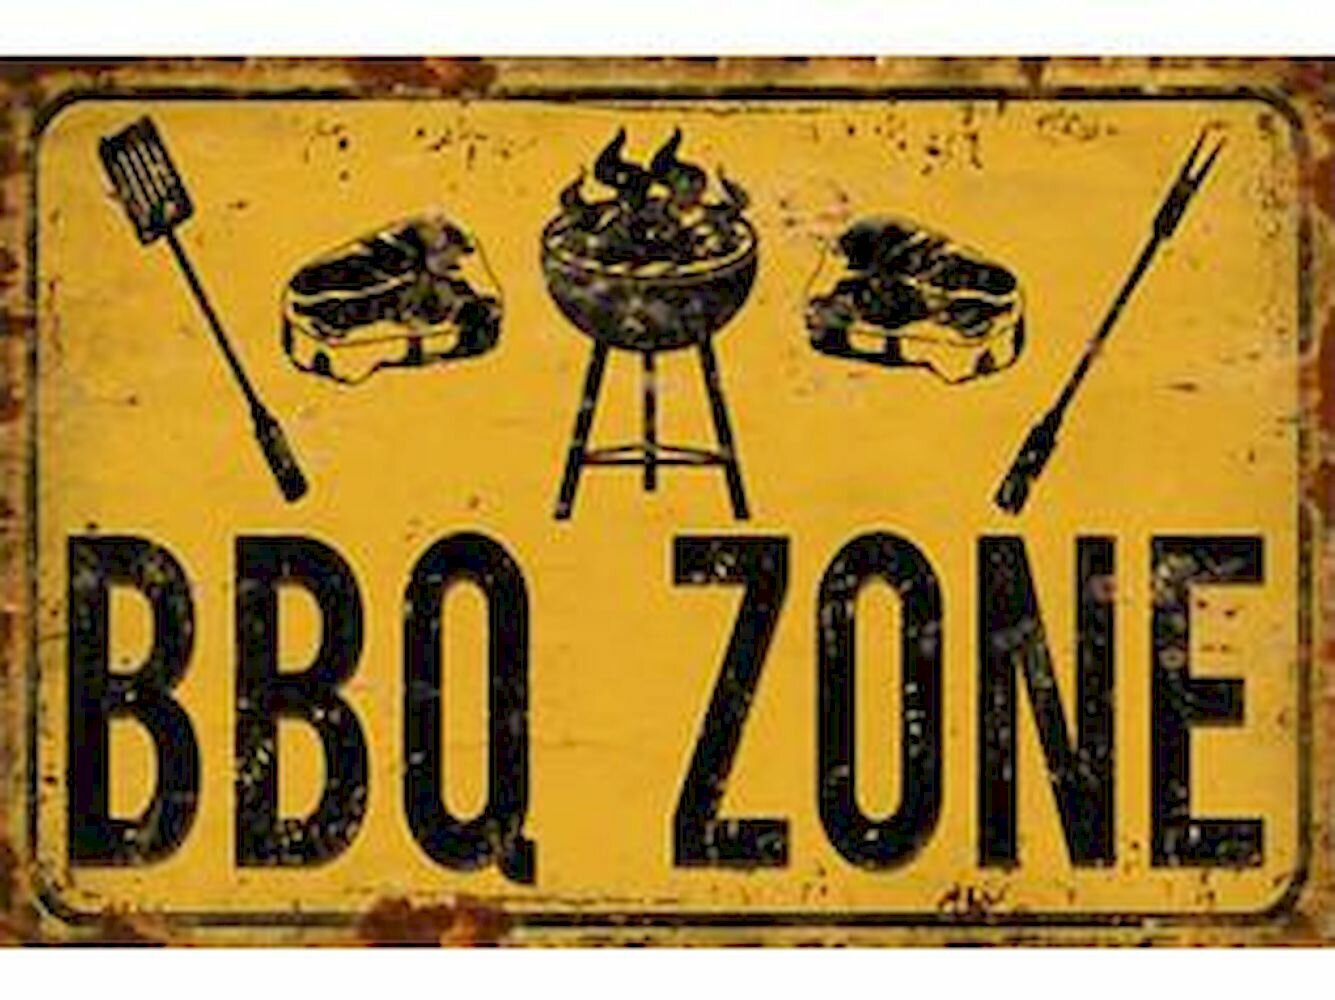 BARBECUE ZONE 12" ROUND SIGN-HIGH QUALITY METAL-WALL COOK GRILL PATIO U32 